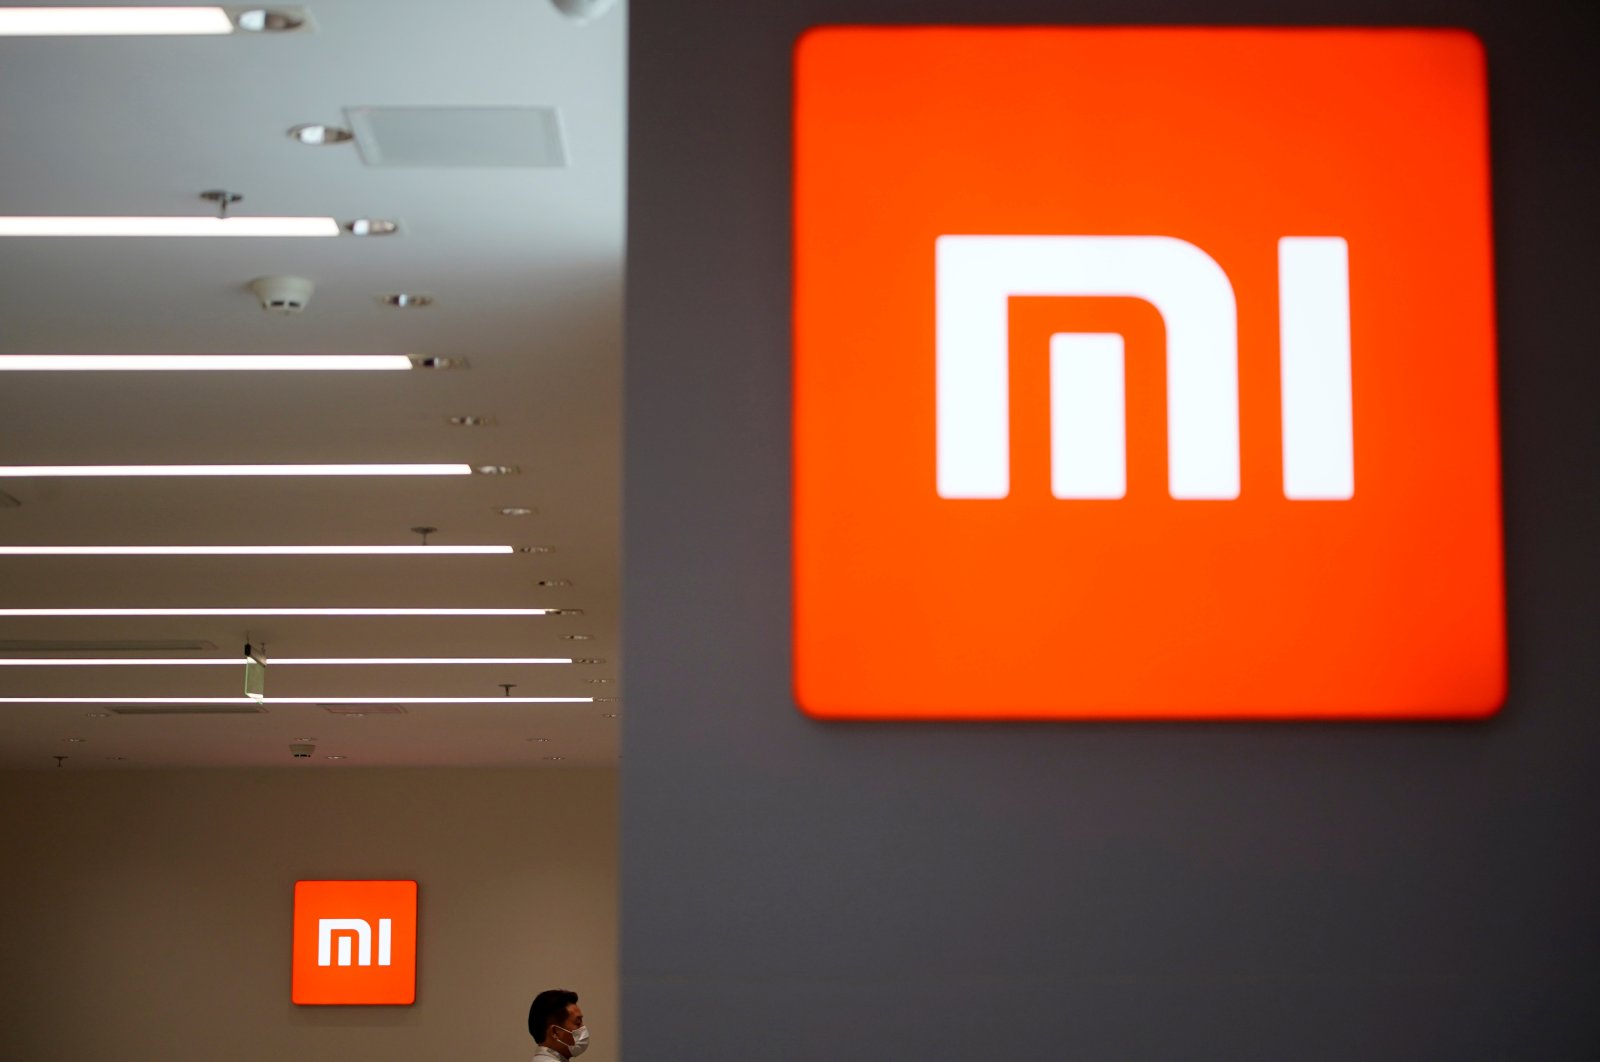 The Xiaomi logo is seen at a Xiaomi shop in Shanghai, China, May 12, 2021. (Reuters Photo)